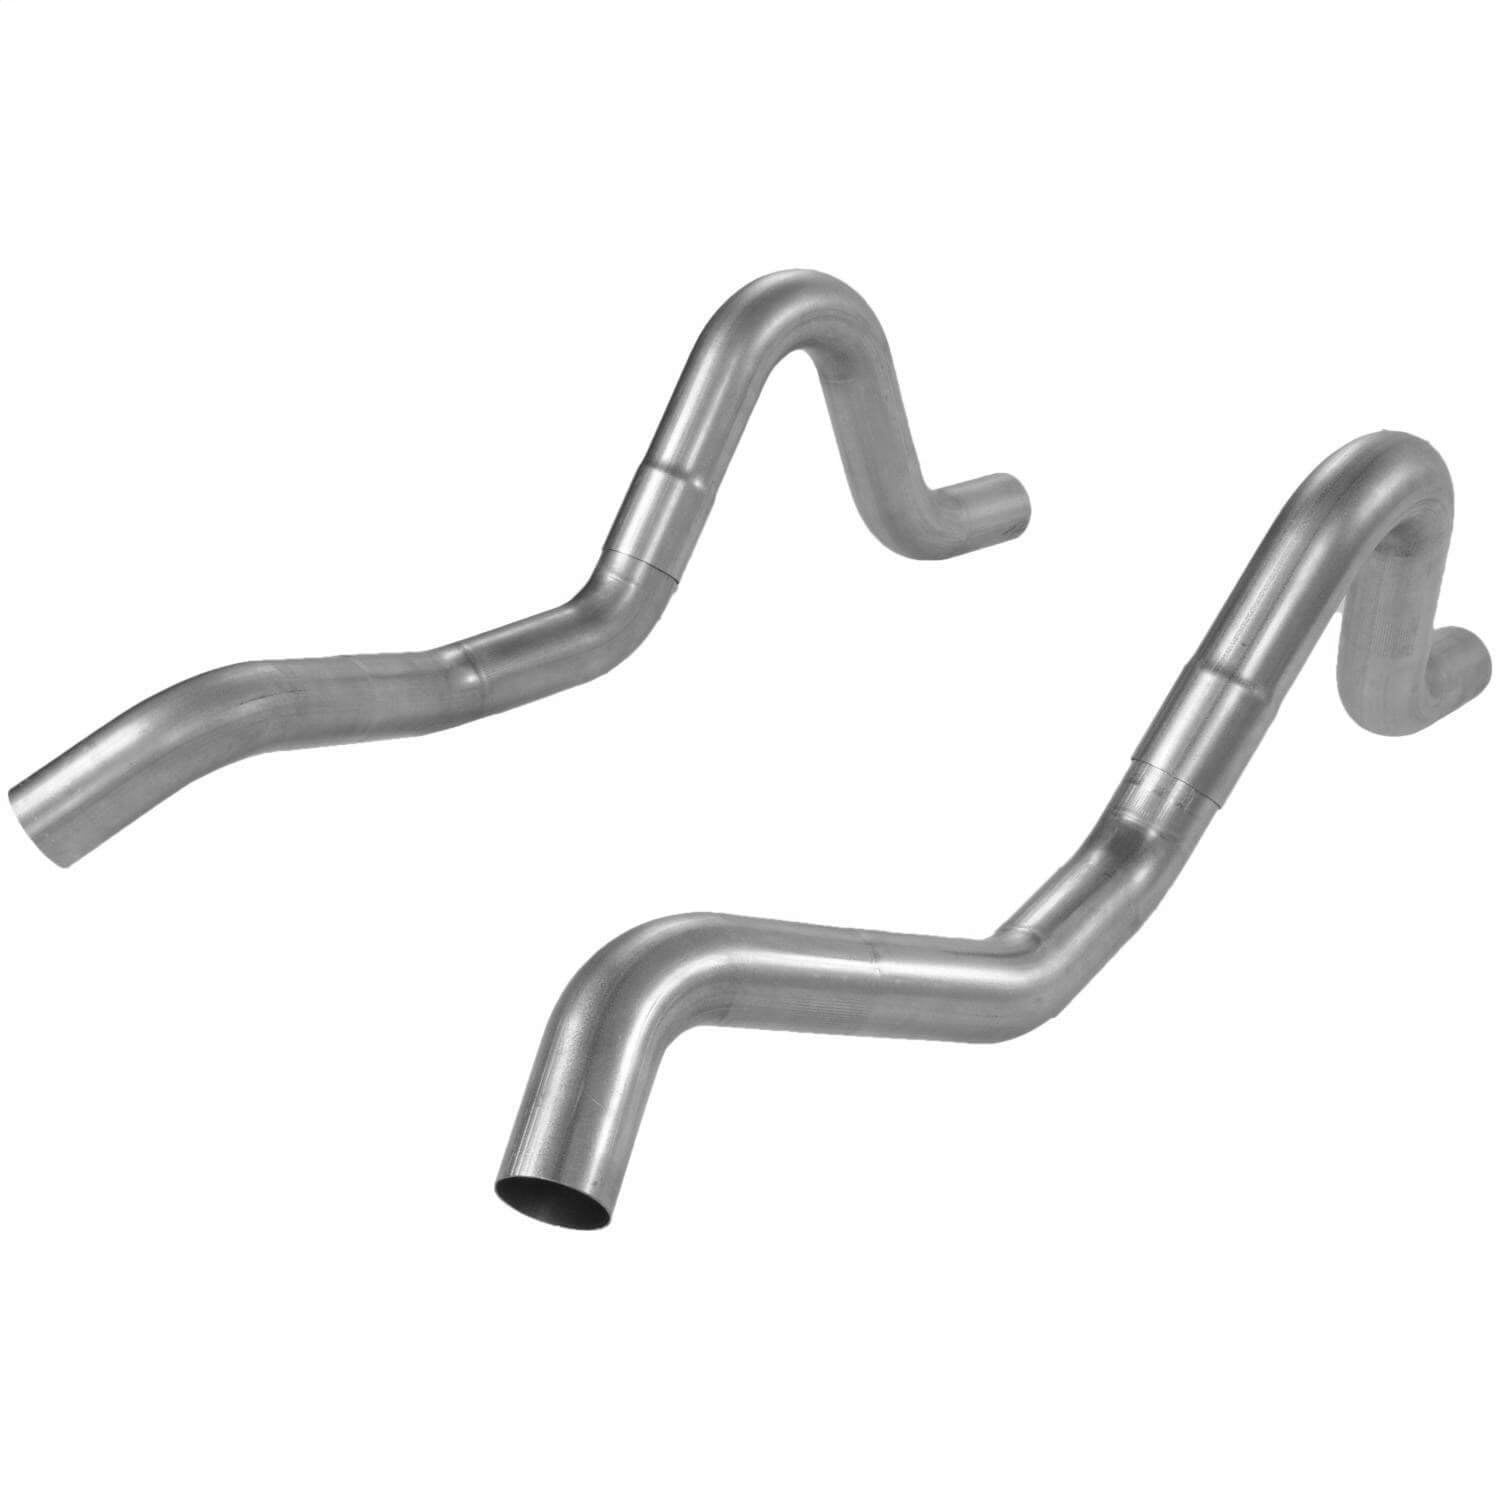 Flowmaster Universal 2.5" 409S Rear Exit 815814 Prebent Tailpipes